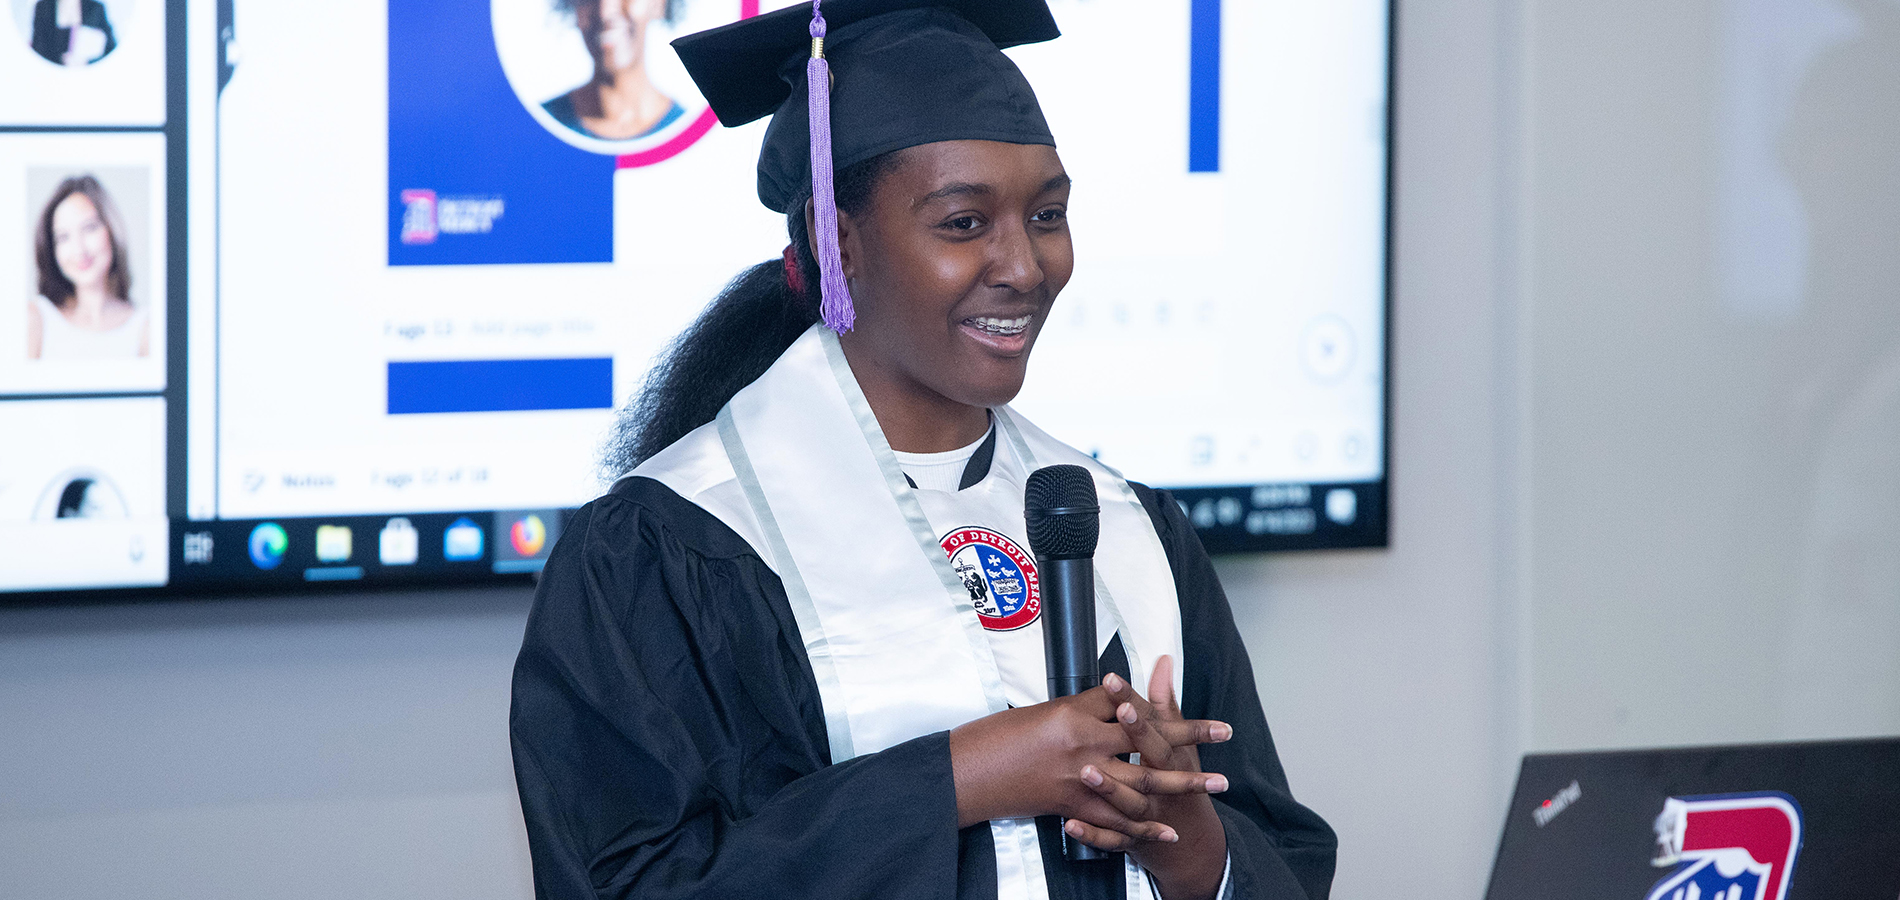 Angel Mangham wears a graduation cap and gown and speaks from a podium inside of a classroom.